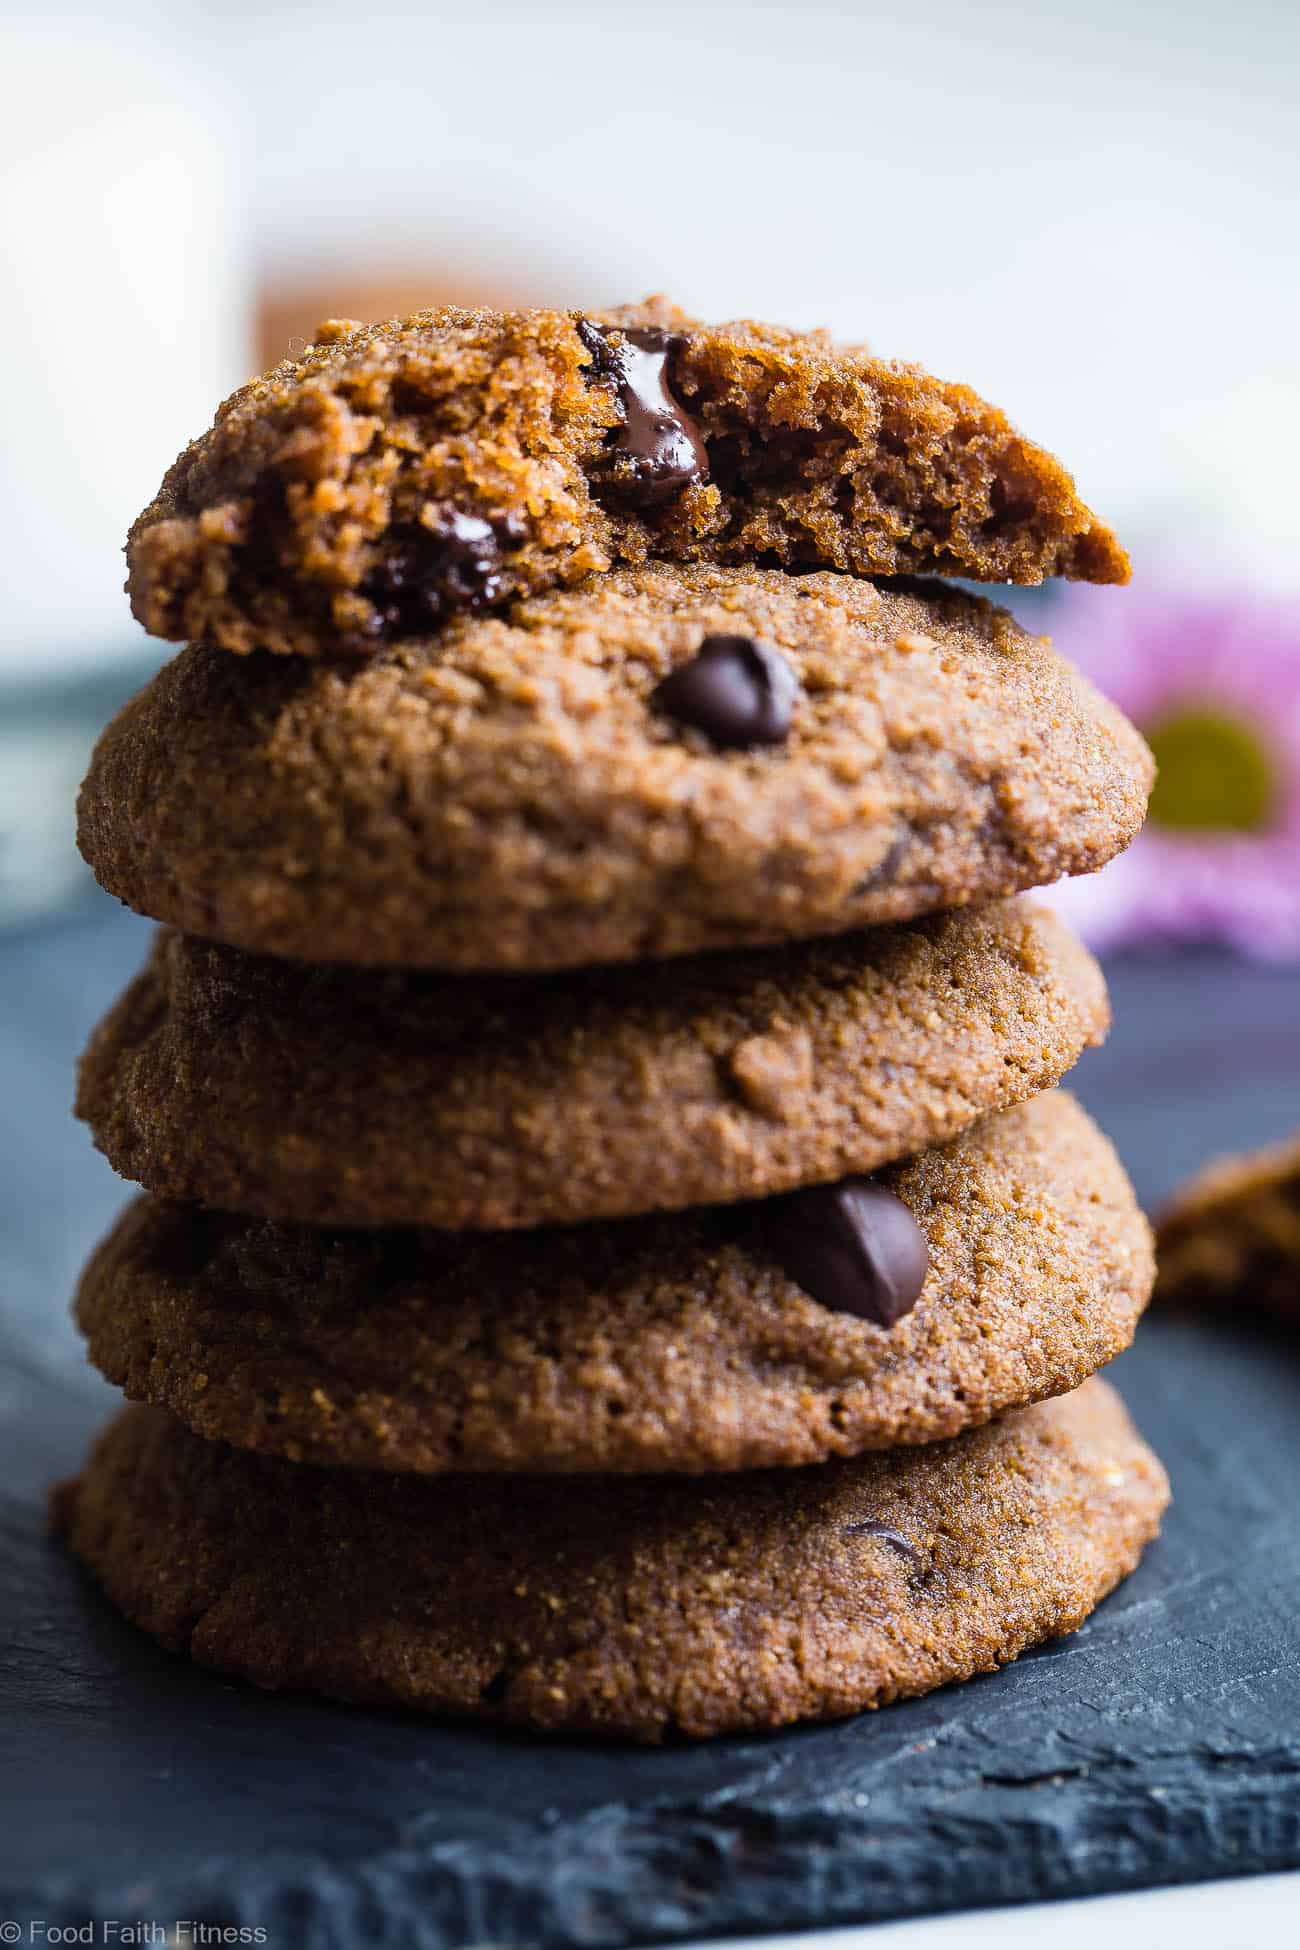 Paleo Chocolate Chip Cookies - These EASY paleo friendly cookies are buttery, soft, chewy and SO rich and chocolaty! You won't believe they are gluten, grain and refined sugar free! | Foodfaithfitness.com | @FoodFaithFit